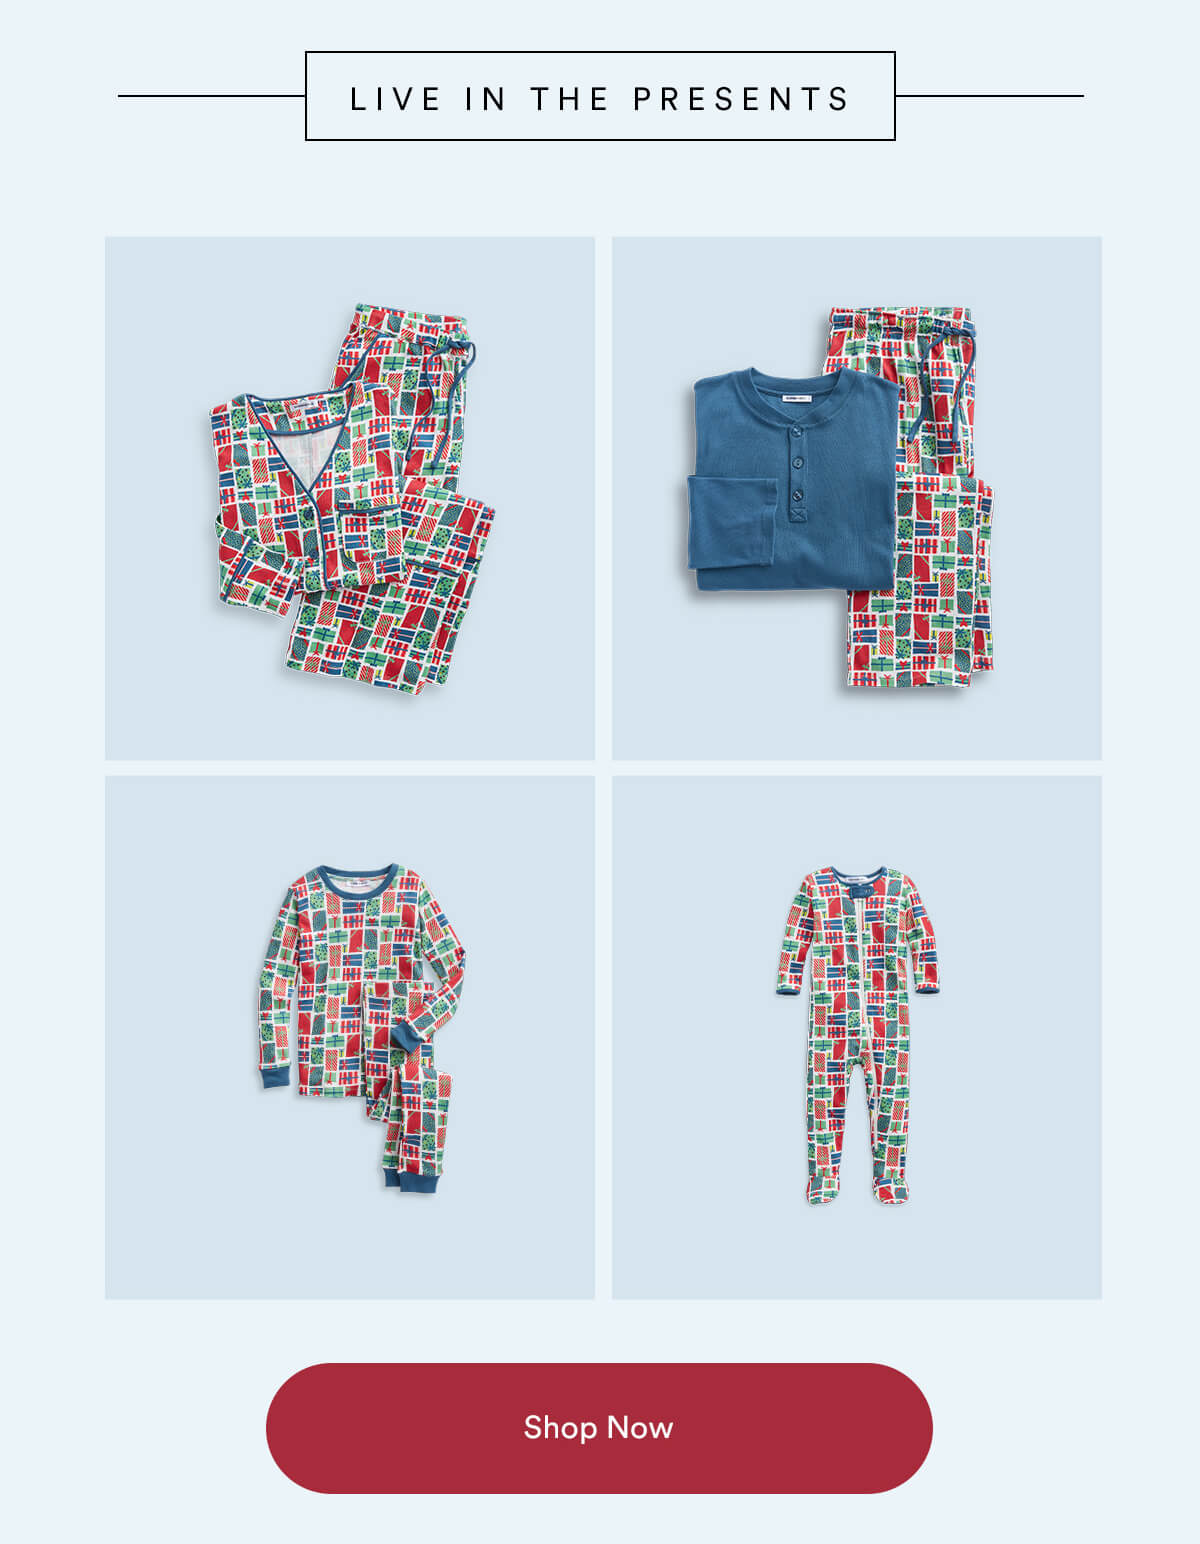 Live in the presents. Four image grid with Holiday Family Pajamas in Live in the Presents print.